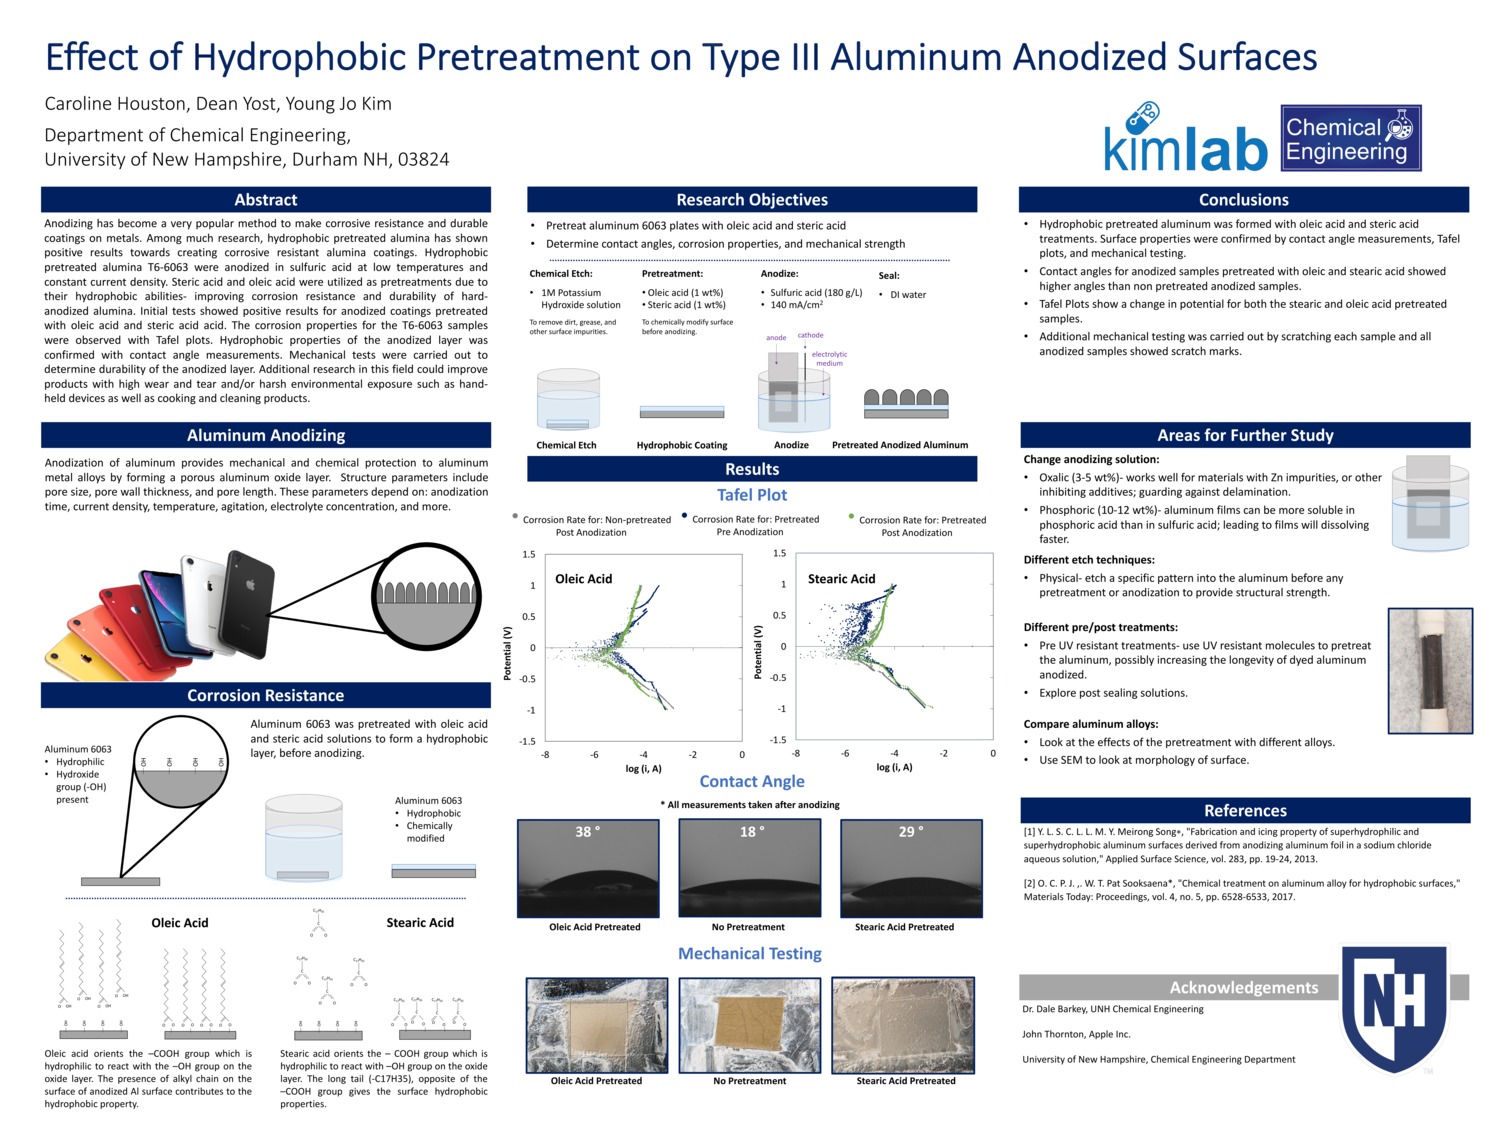 Effect Of Hydrophobic Pretreatment On Type Iii Aluminum Anodized Surfaces by ch1031